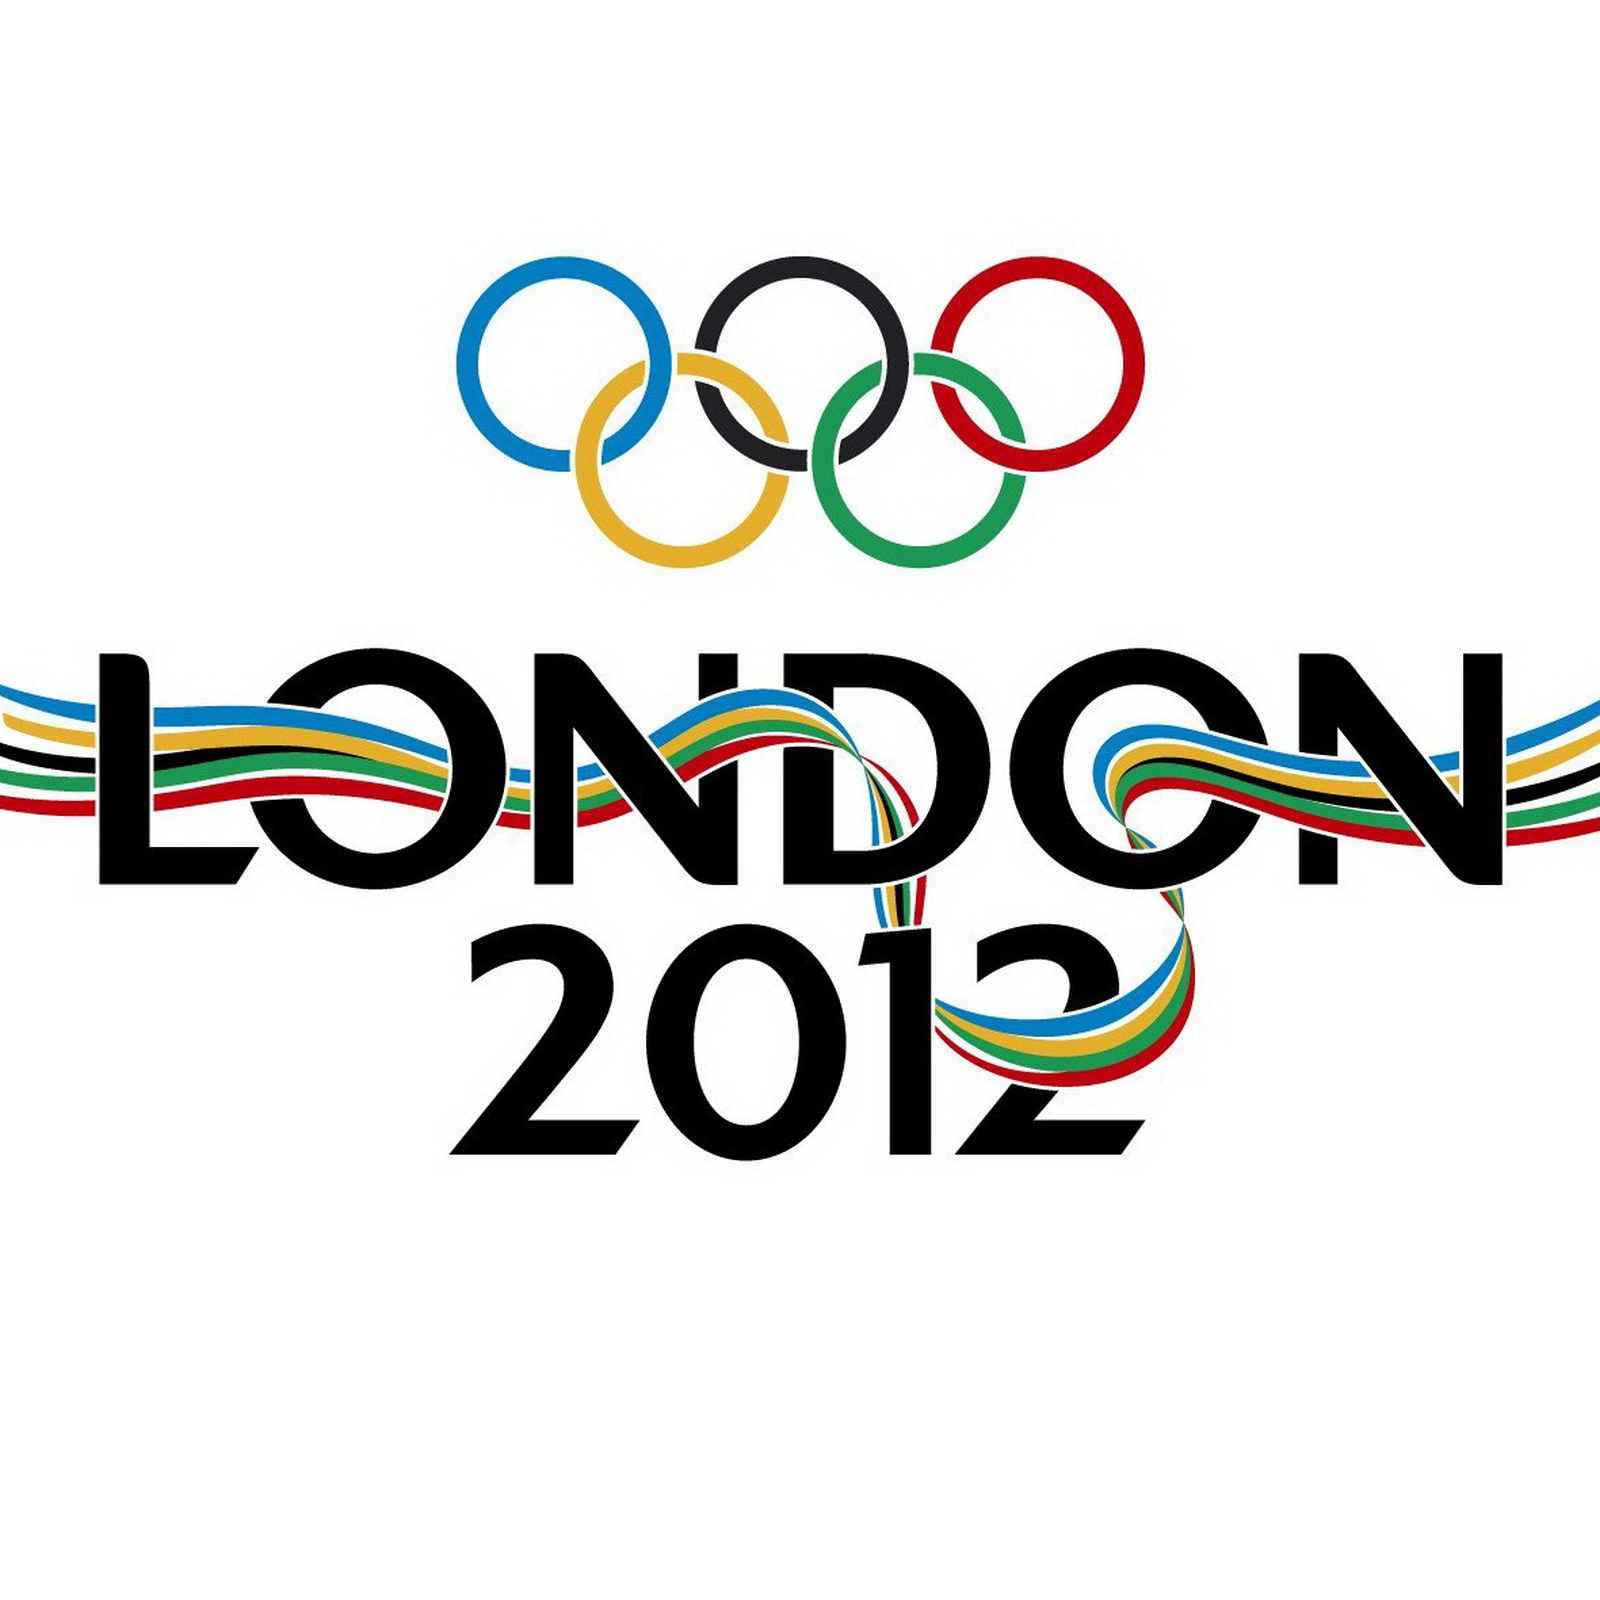 Selected supplier to the London Olympics 2012